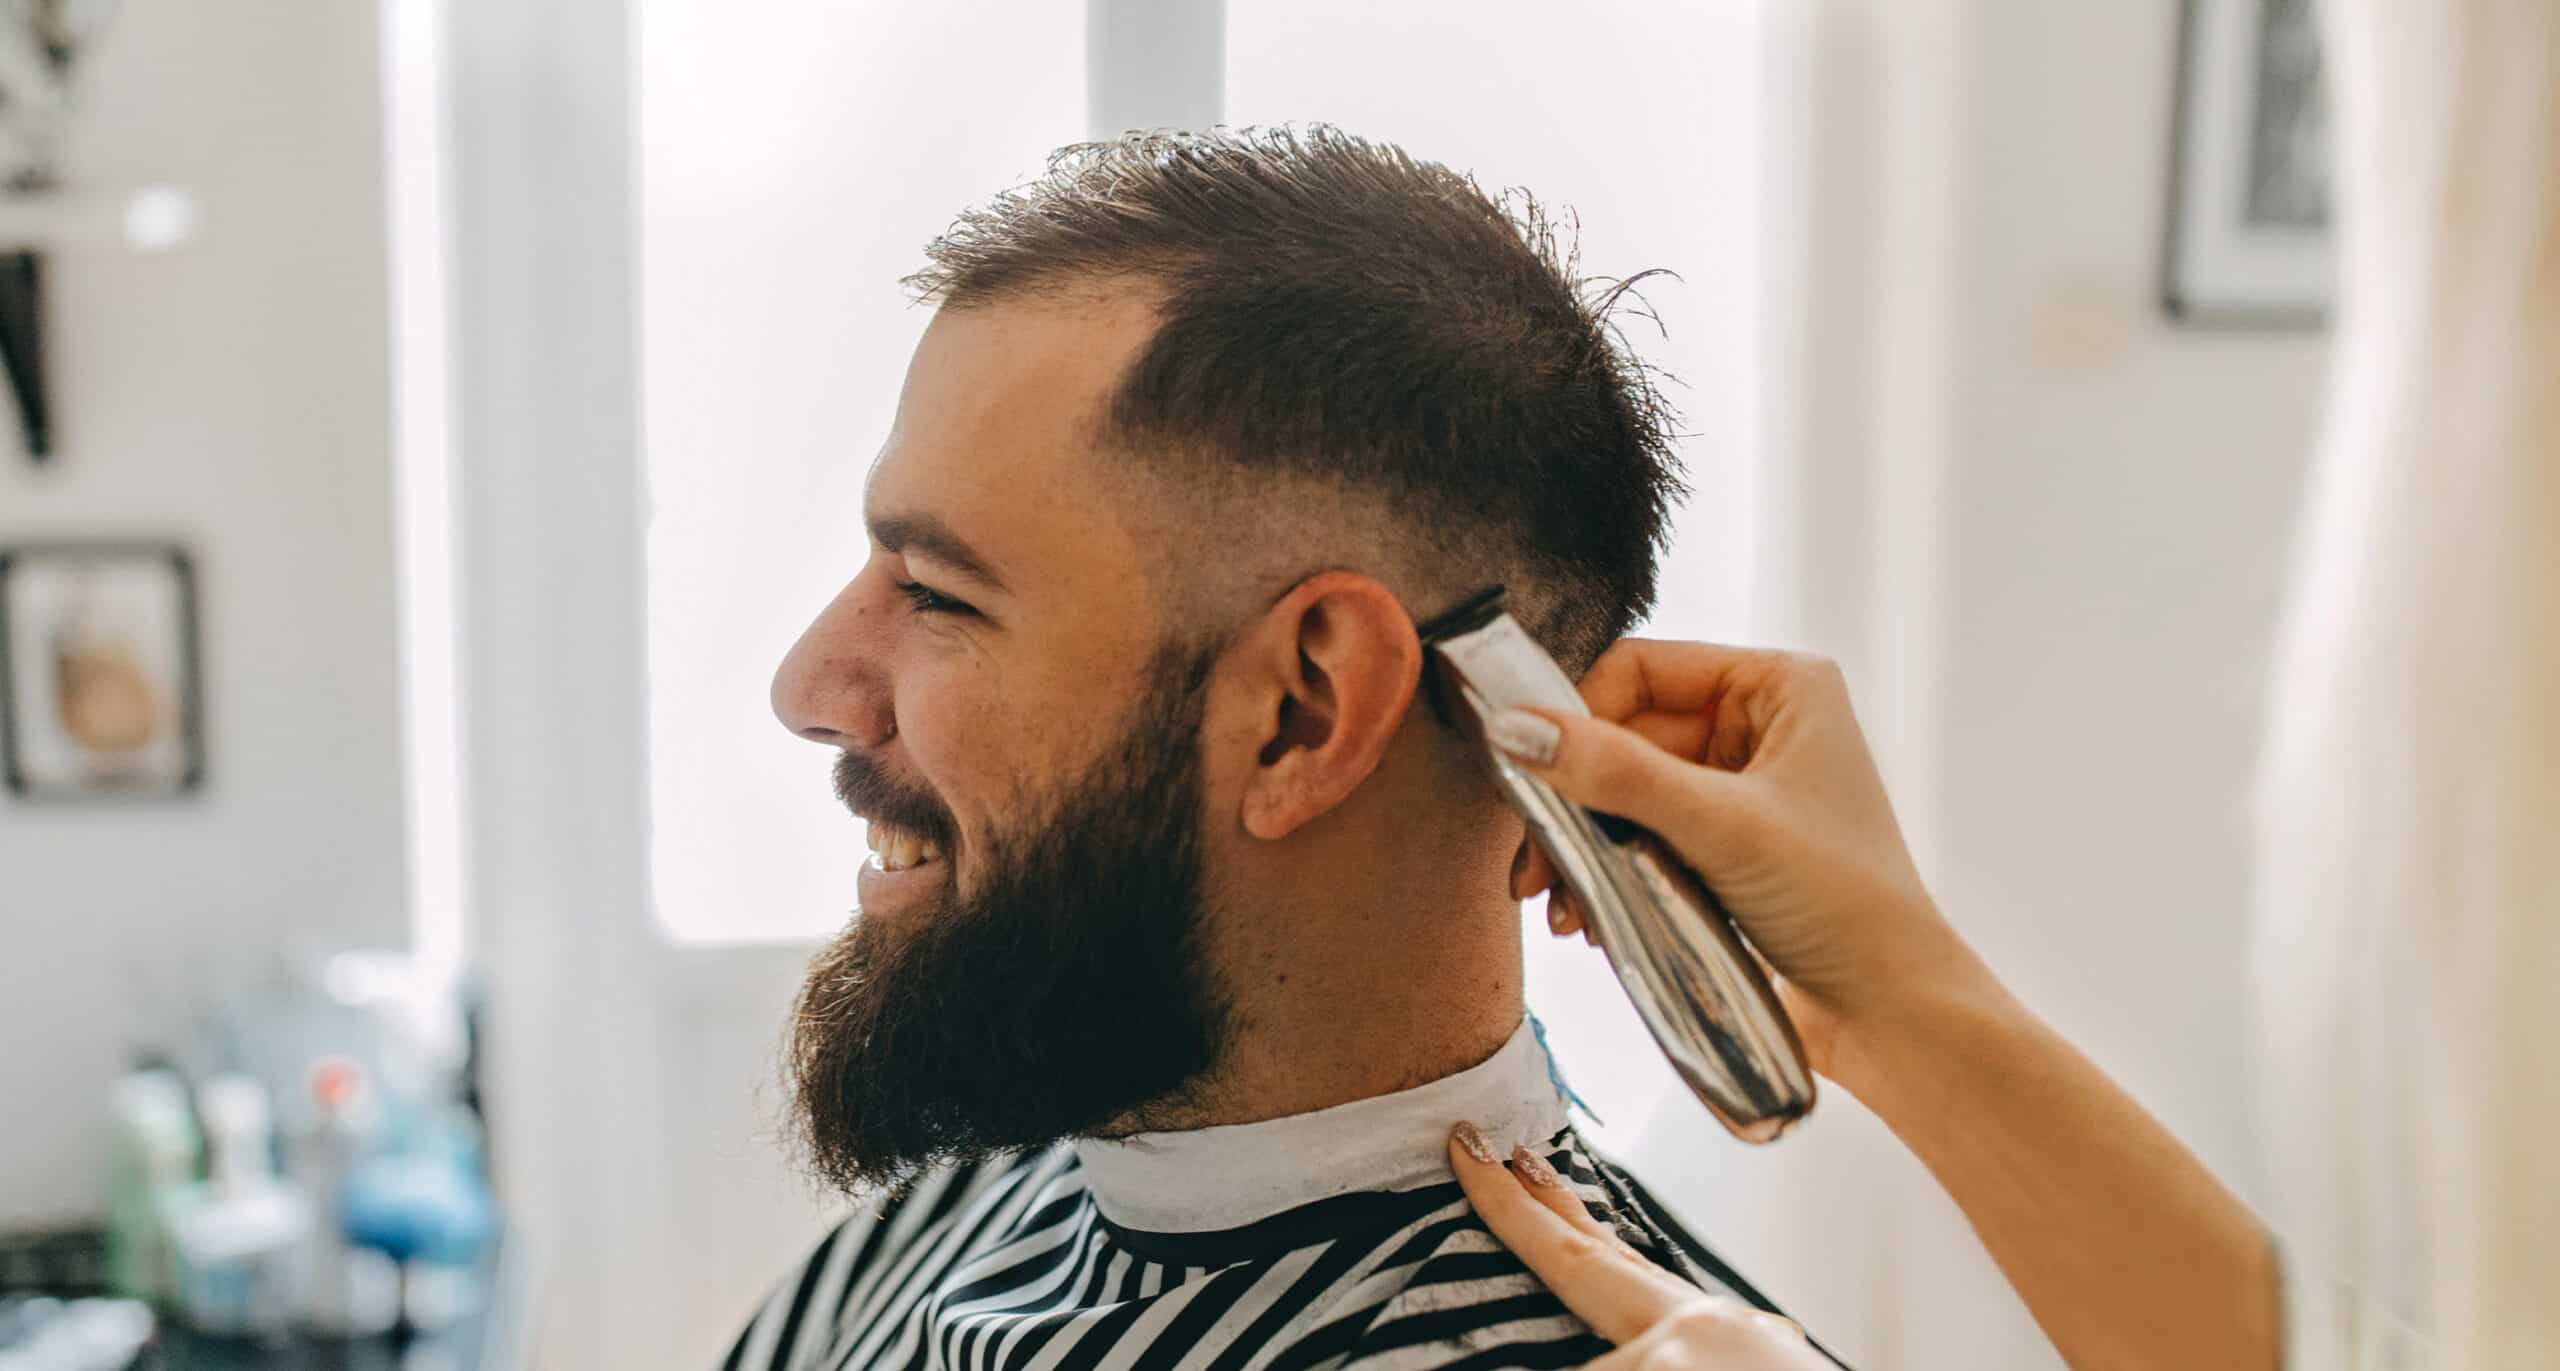 How to Grow Out an Undercut or Half-Shaved Hairstyle – StyleCaster